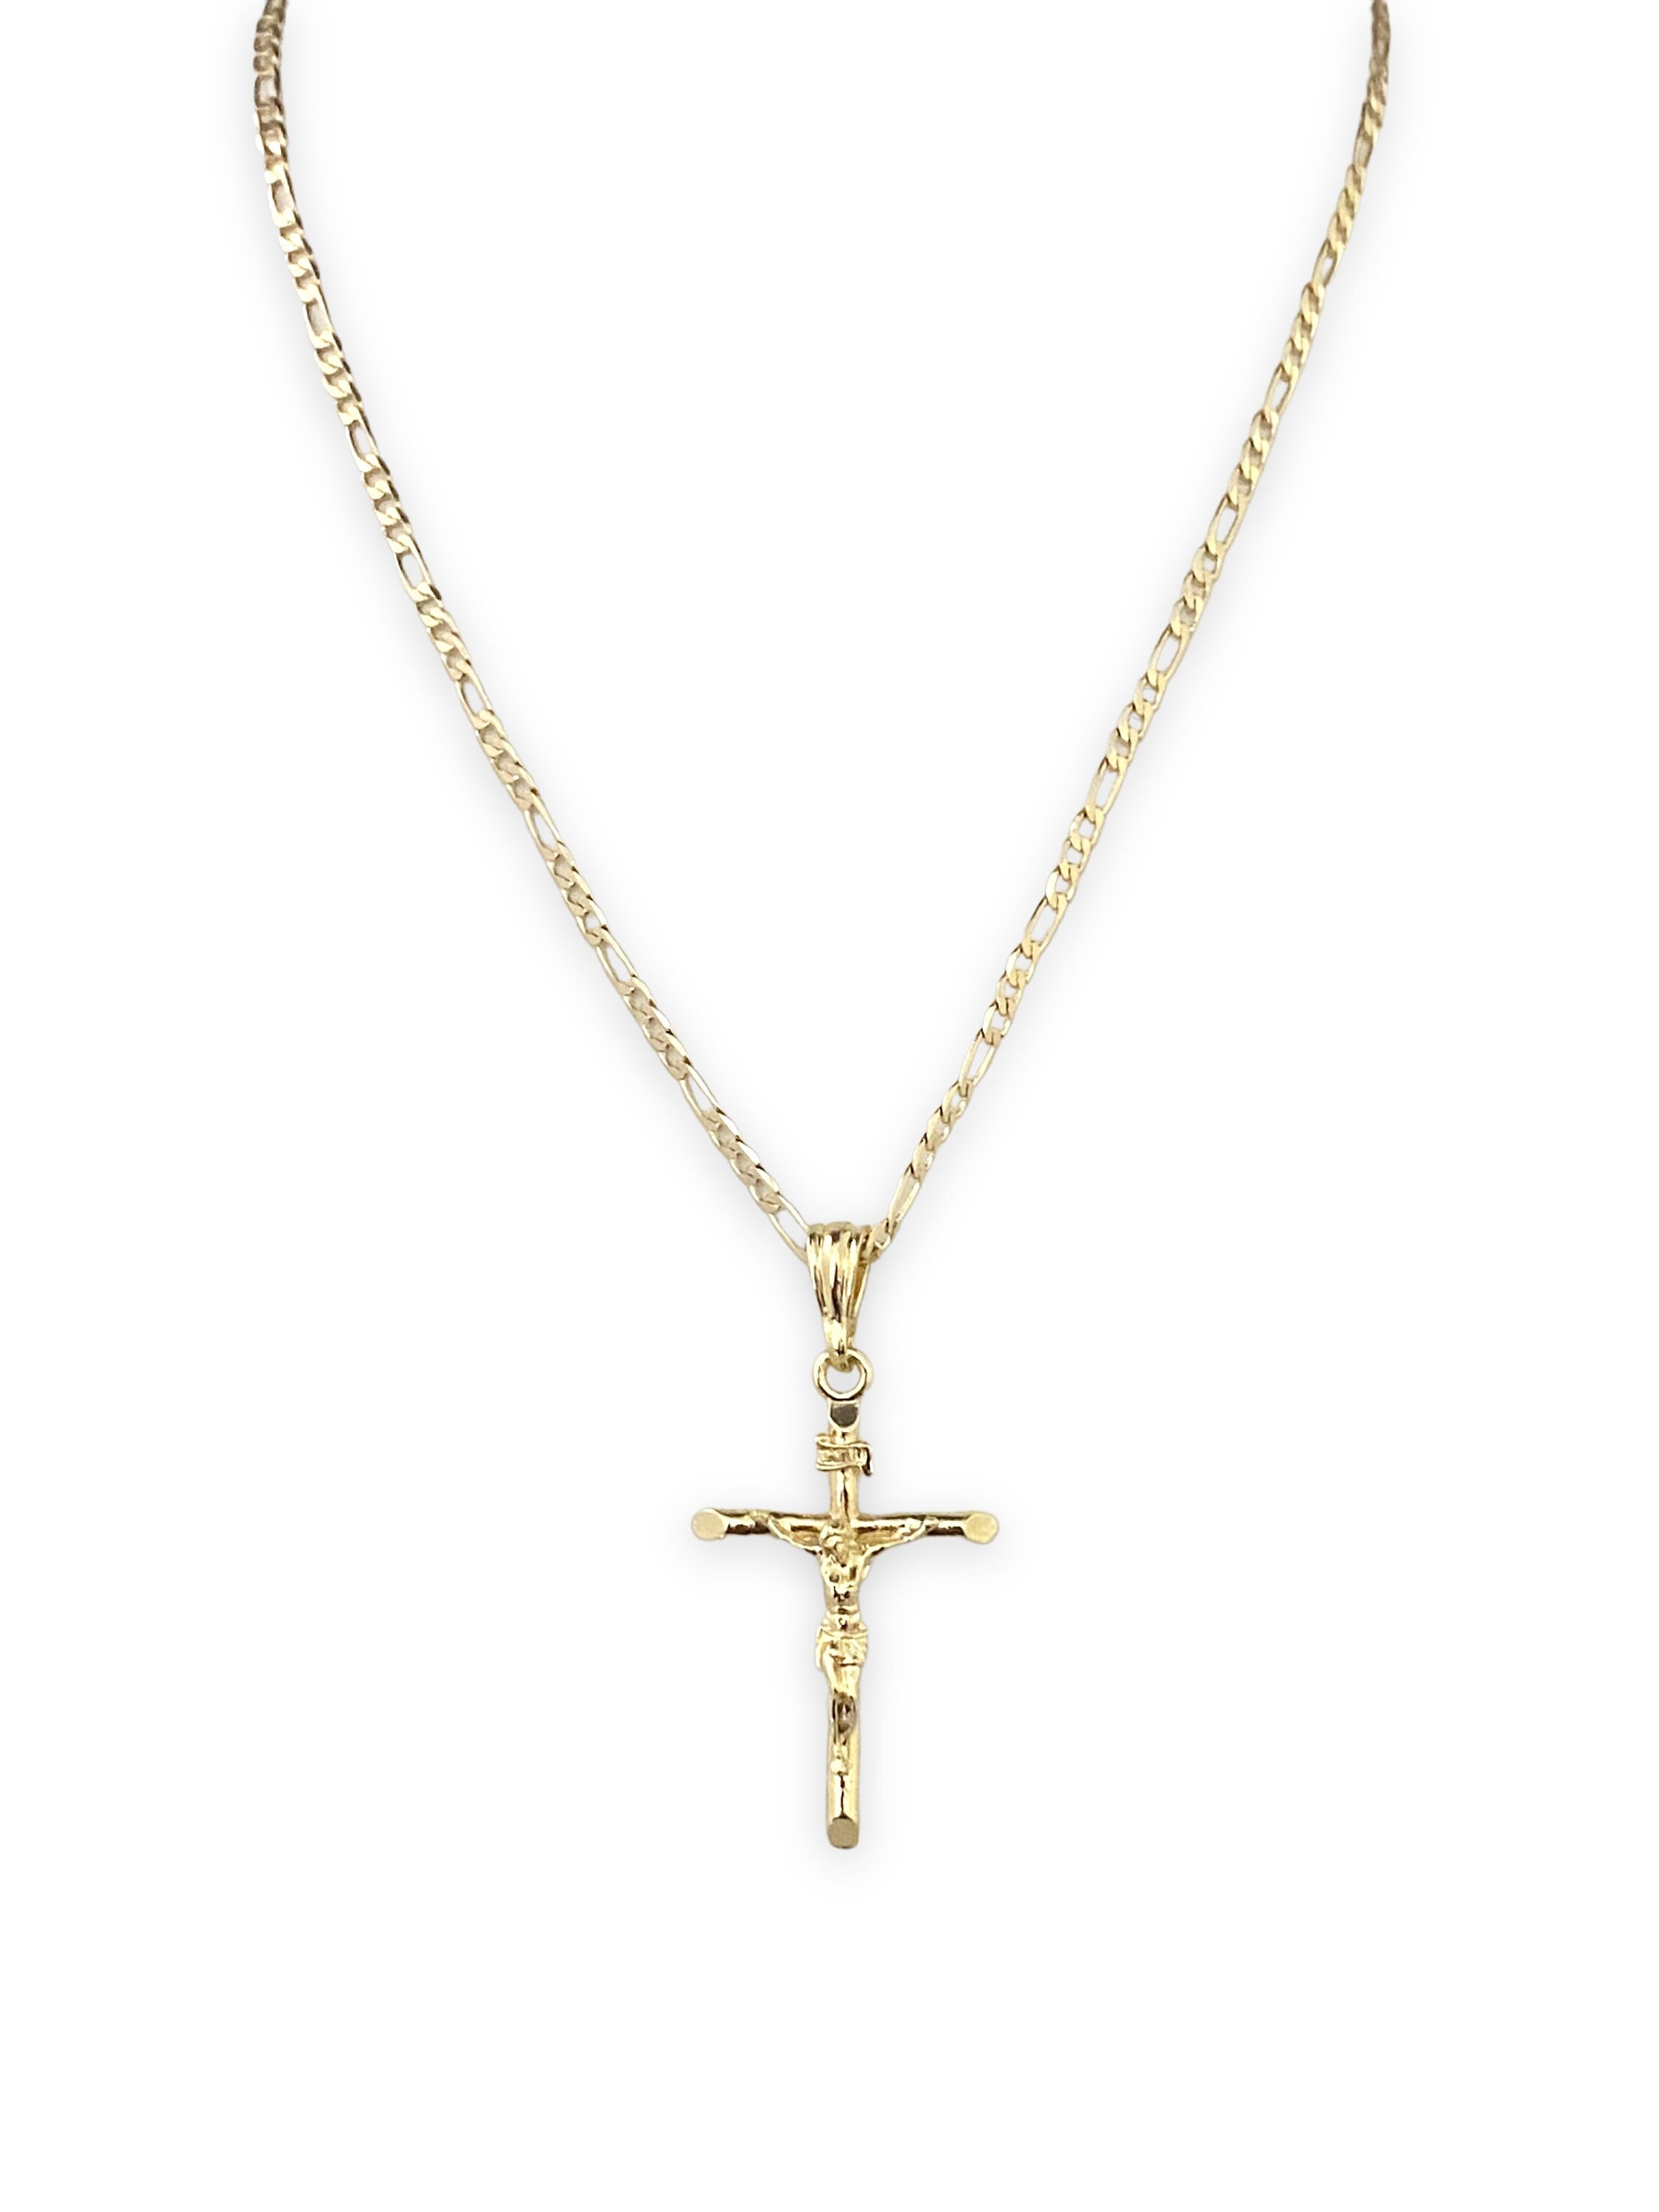 Jesus Cross Crucifixion 14K Gold Plated Pendant Charm Necklace - Etsy